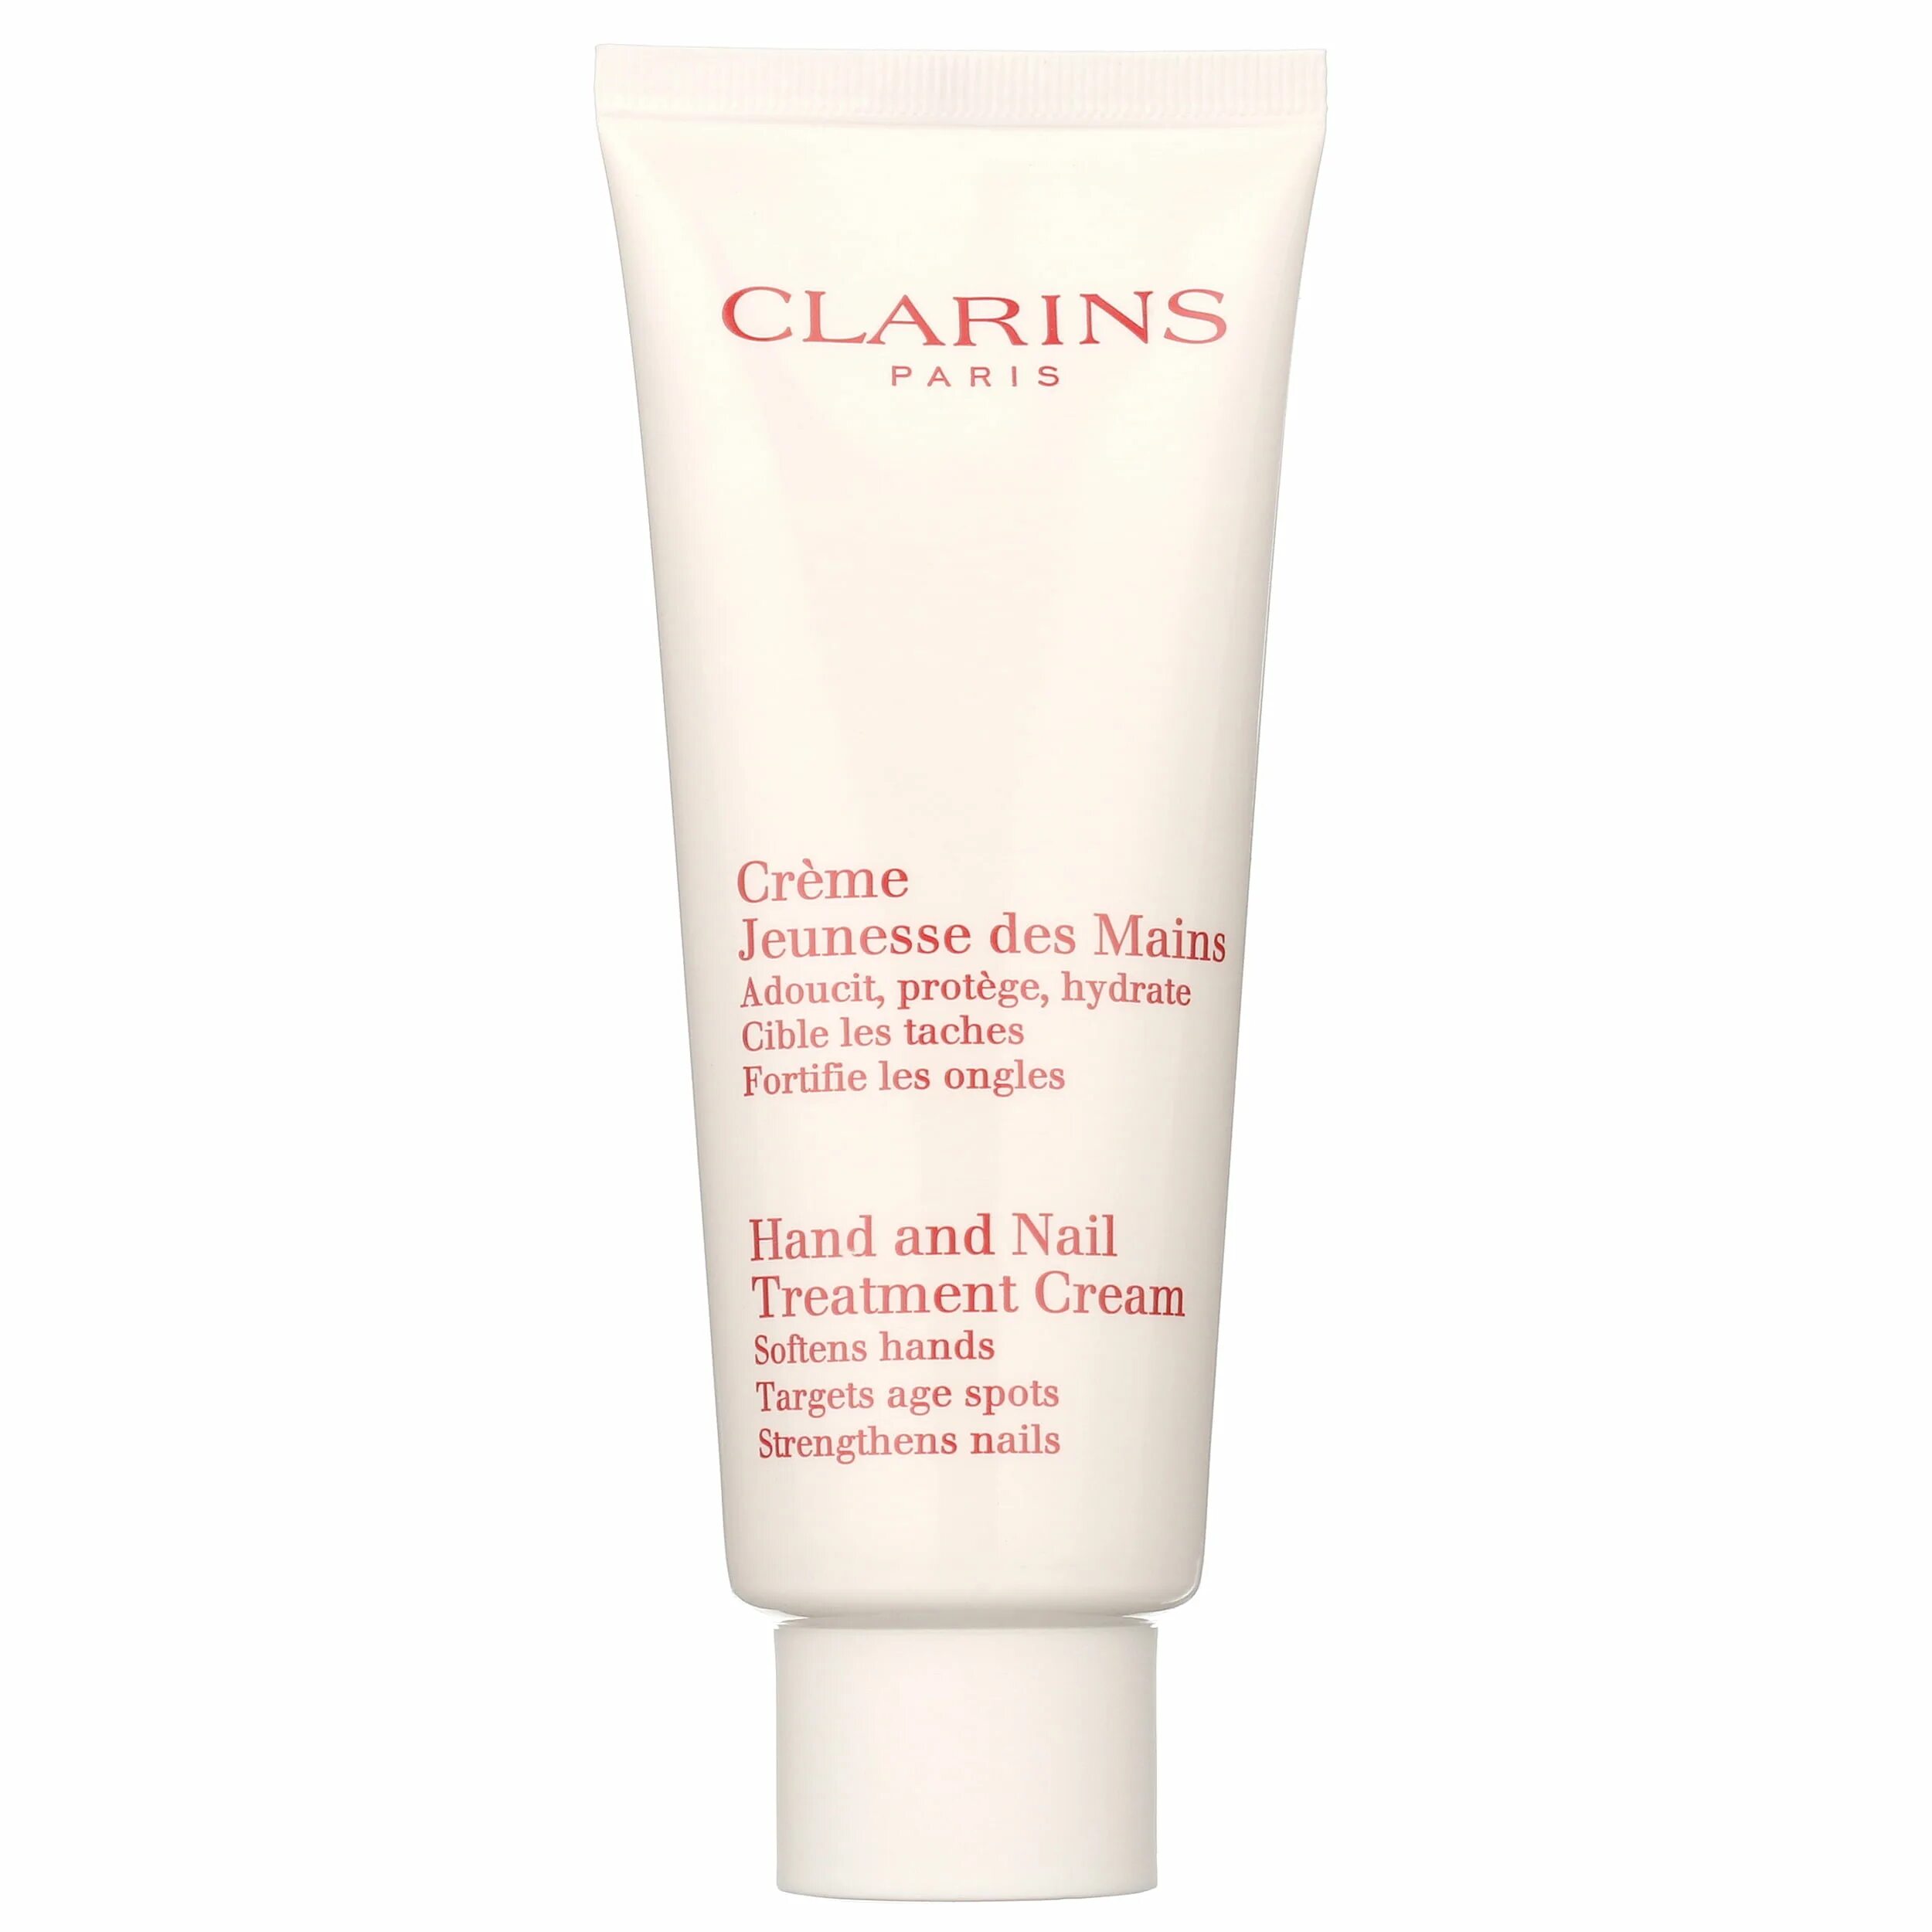 Gentle foaming cleanser. Clarins gentle Foaming Cleanser. Clarins Purifying gentle Foaming. Кларанс Париж. Clarins hand and Nail treatment Cream.